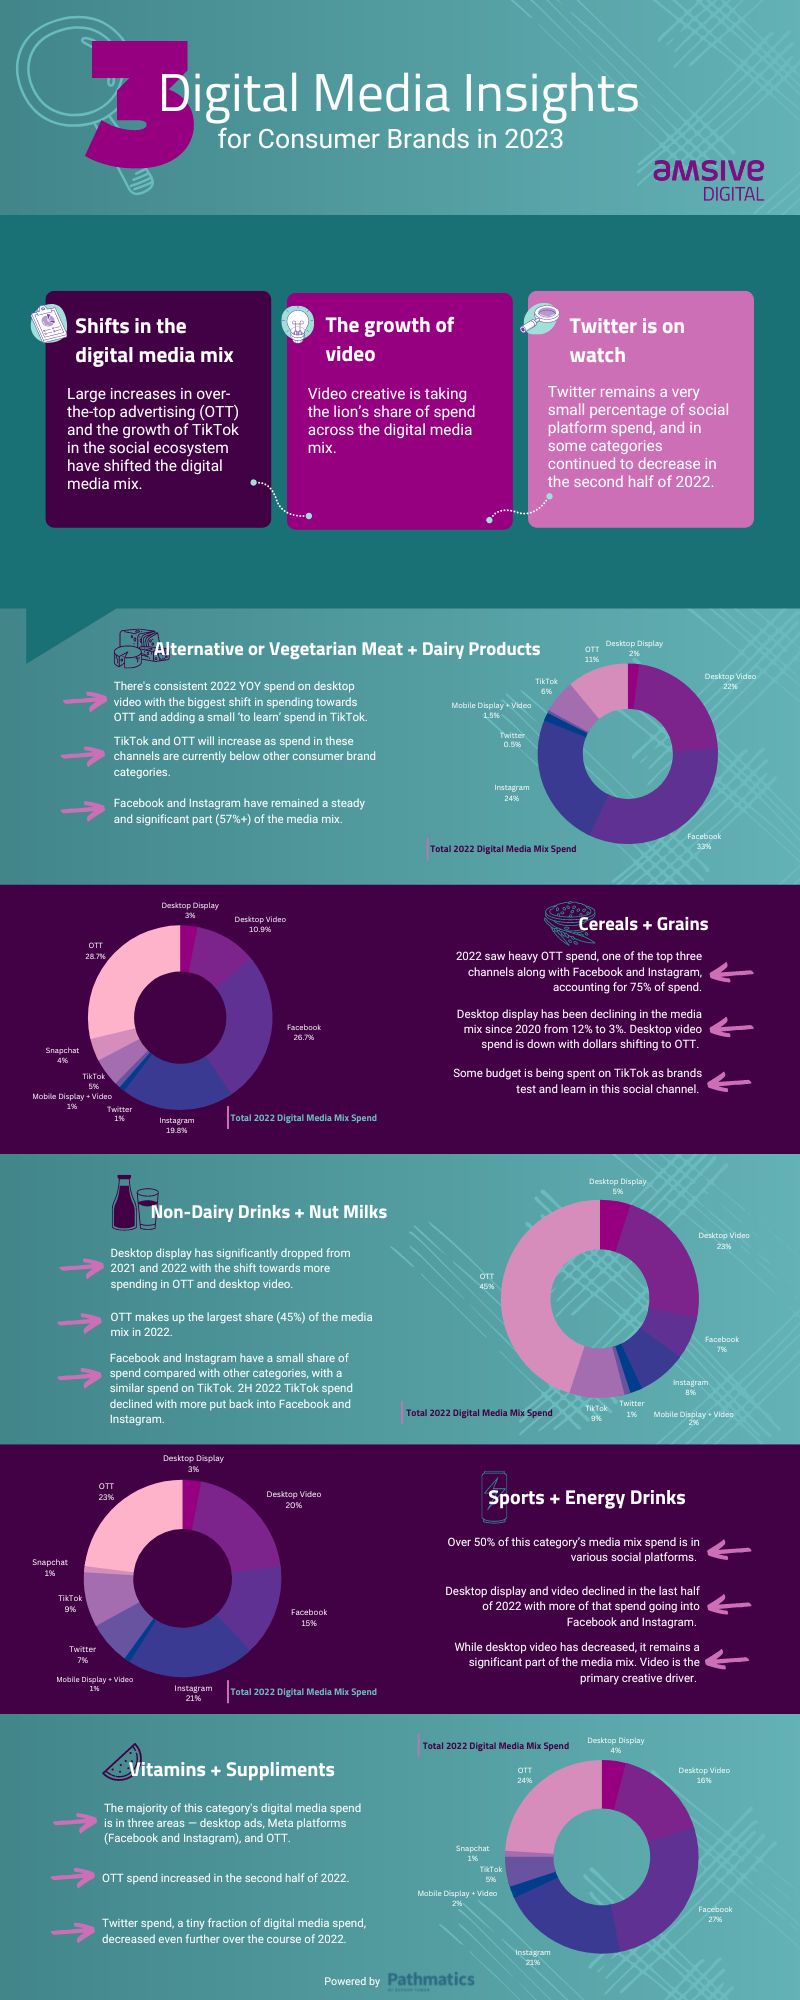 Infographic of three digital media insights for Consumer Brands in 2023. Uses 2022 data on advertising spend for Alternative & Vegetarian Meat & Dairy Products, Cereals and Grains, Non-Dairy Drinks & Nut Milks, Sports & Energy Drinks, and Vitamins & Supplements.